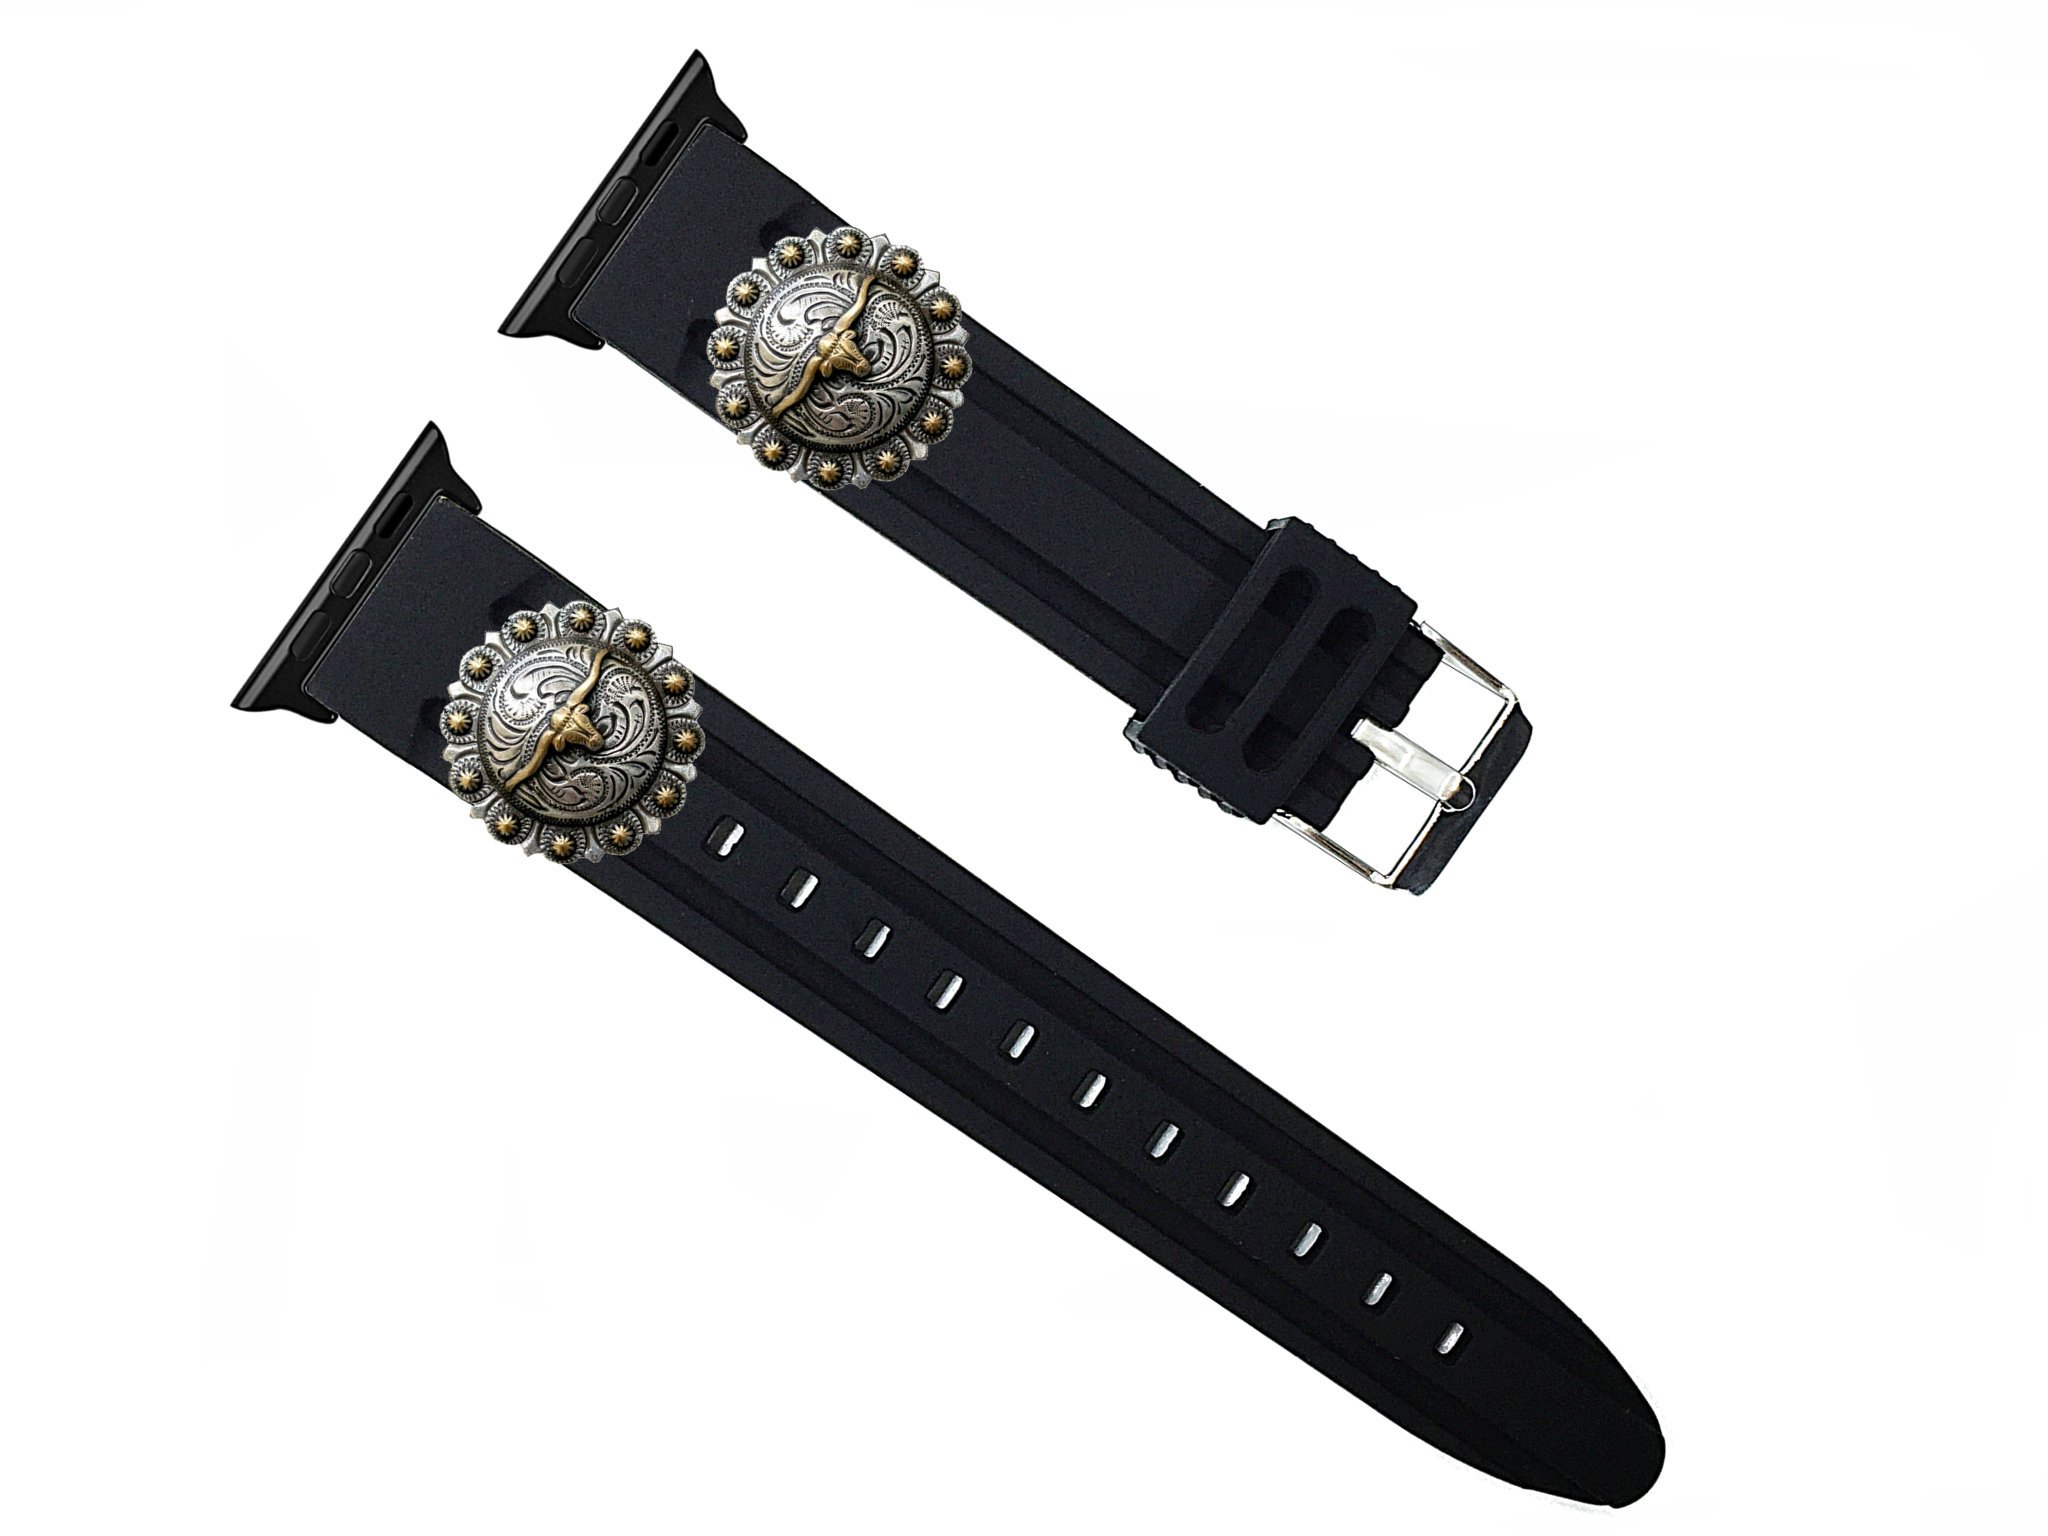 Cowboy 3 Blk42 Band Strap With Metal Accent Badges Compatible For